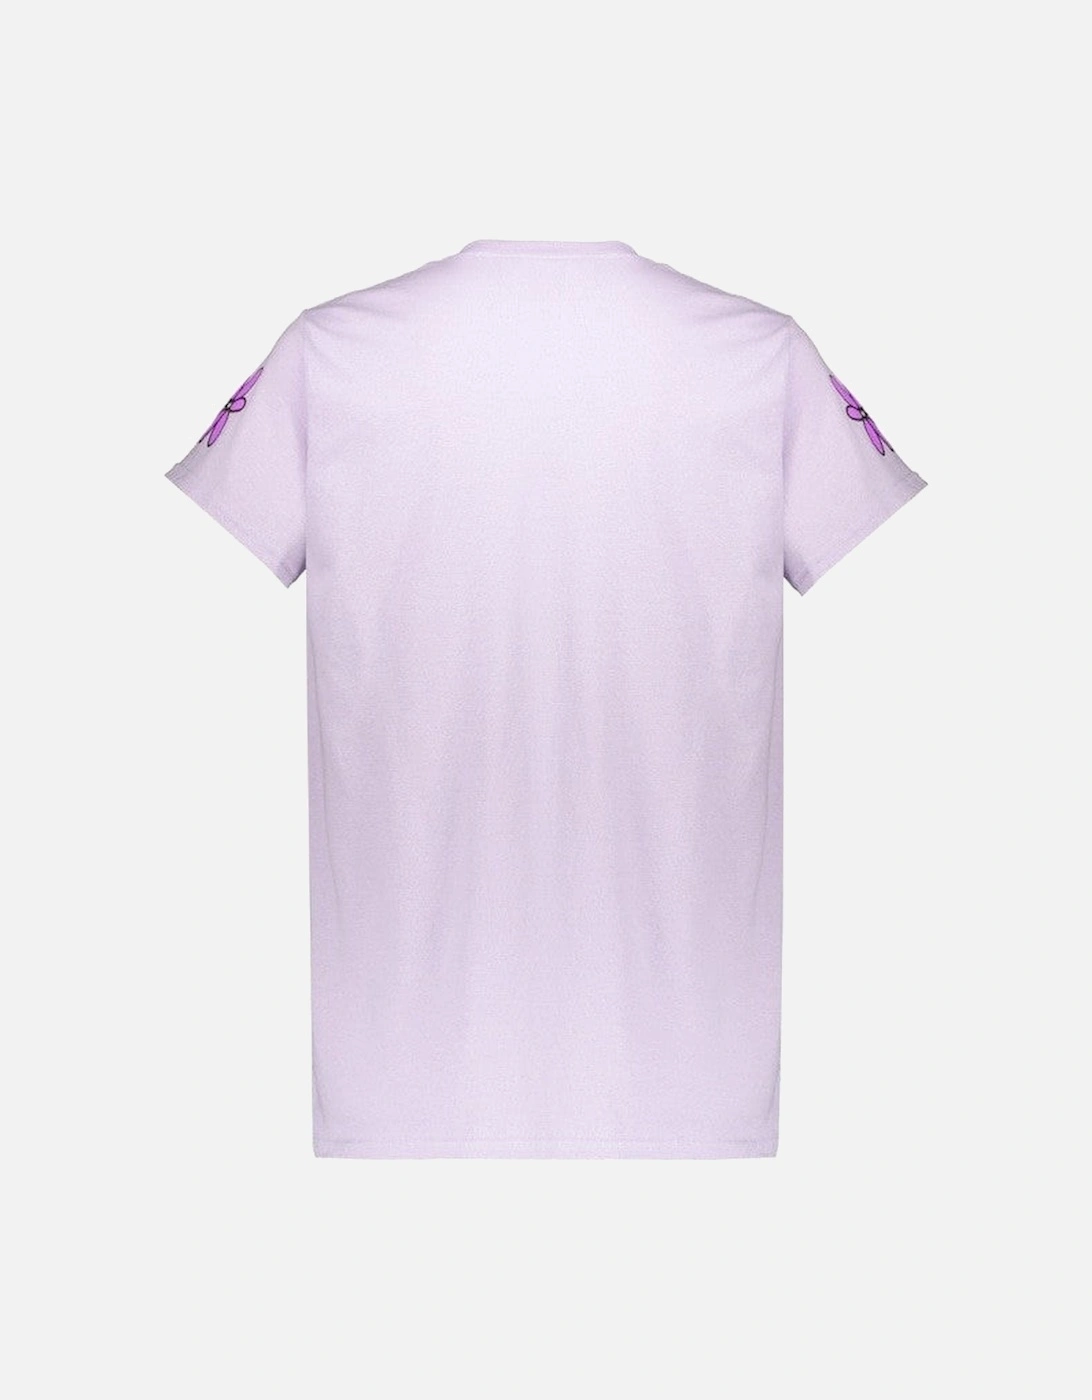 Quiet Life Now Forever Tee - Lilac